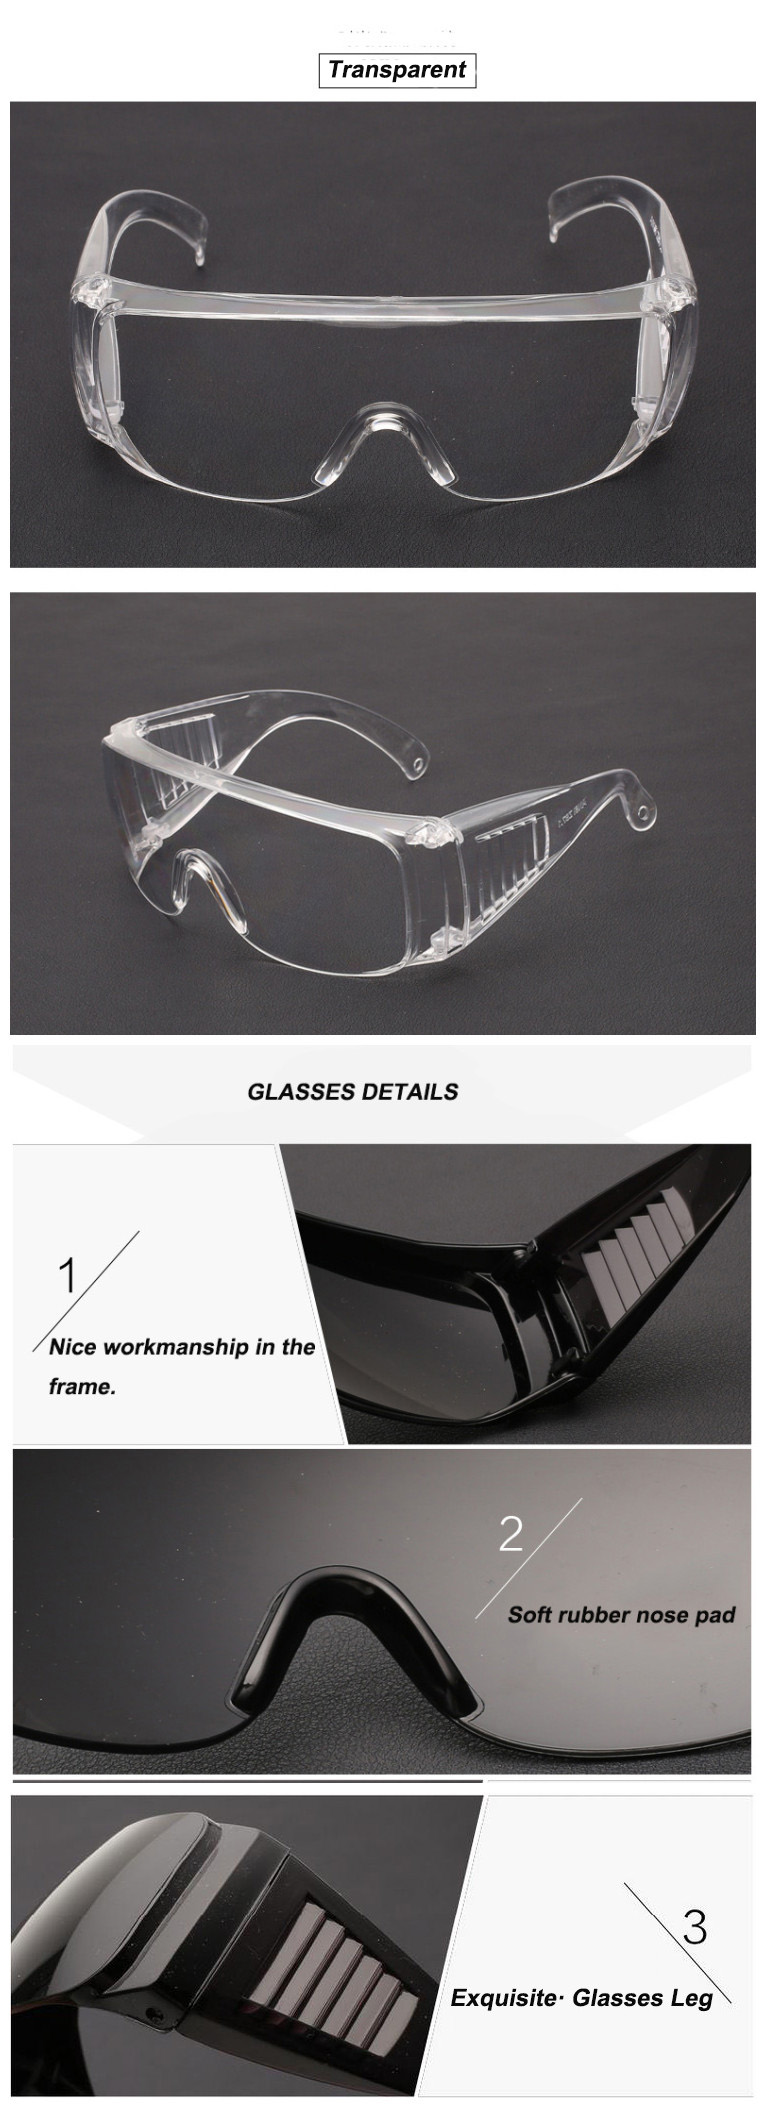 Bike-Bicycle-Optical-Glasses-Goggles-Dustproof-Windproof-Protective-Safety-Lens-For-Cycling-939112